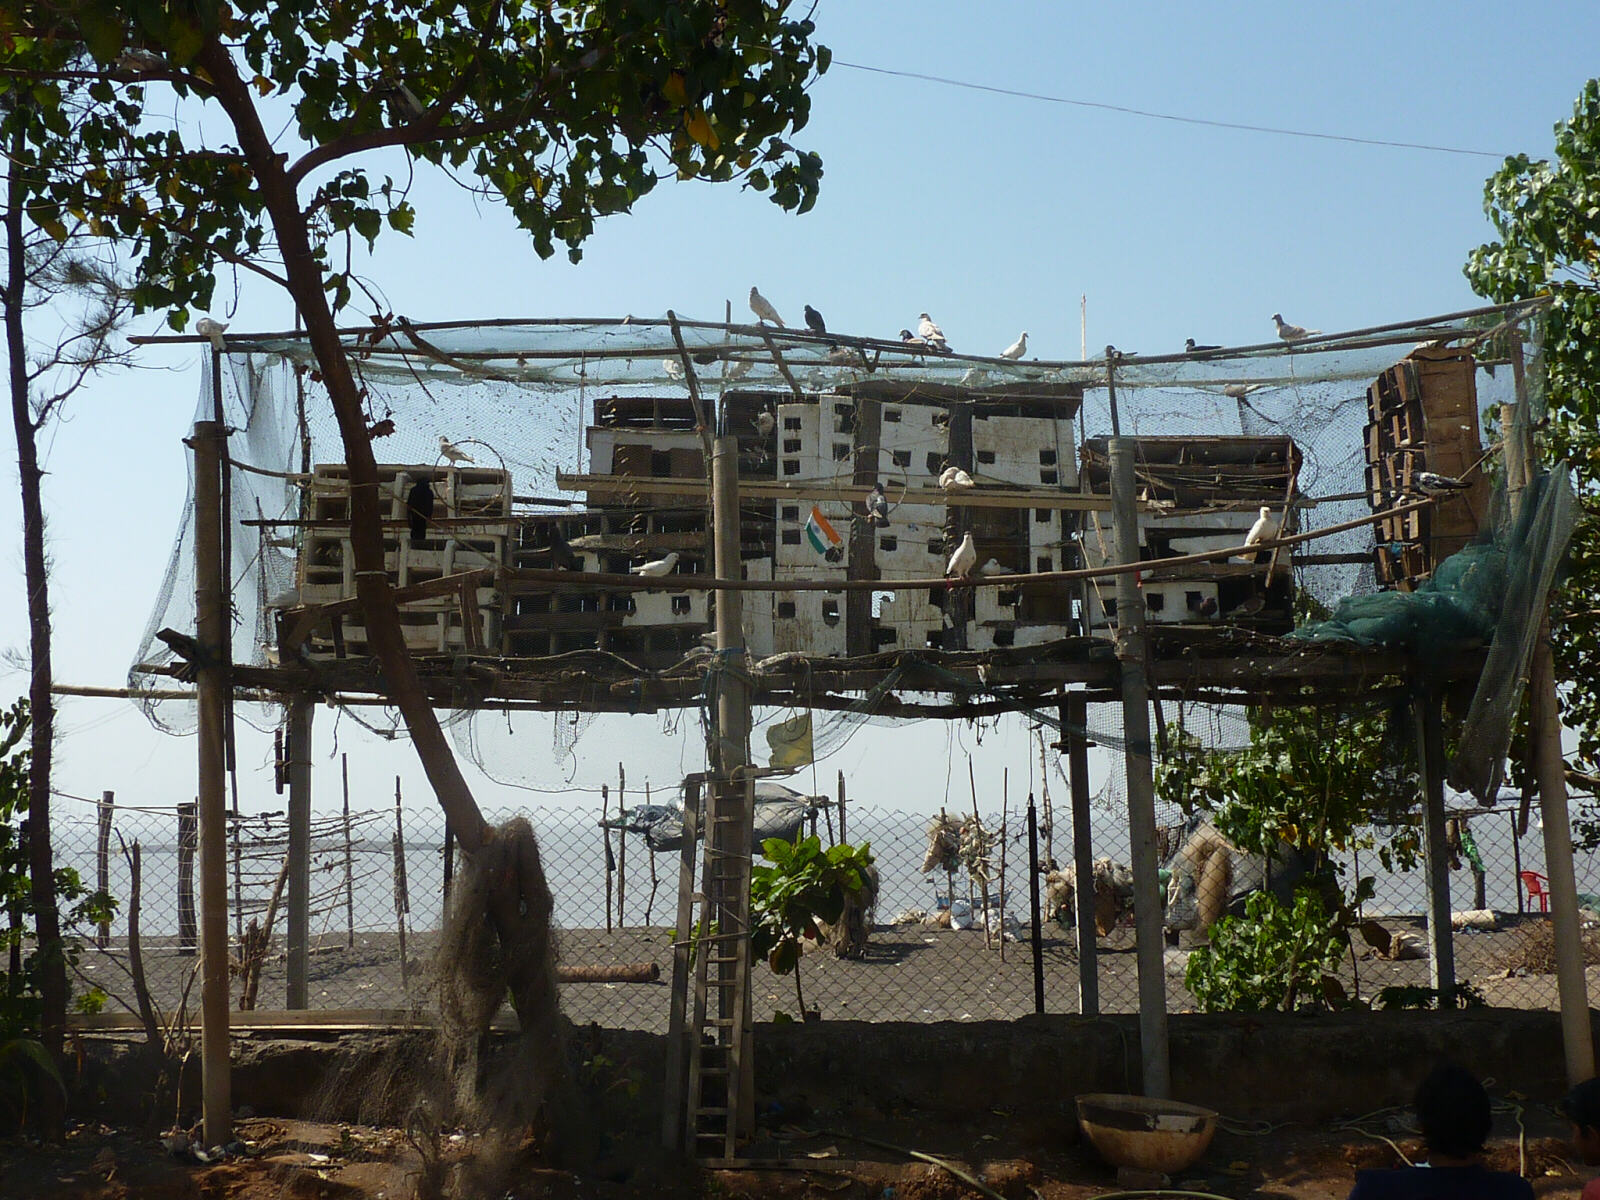 Pigeon houses on the beach in Daman, India